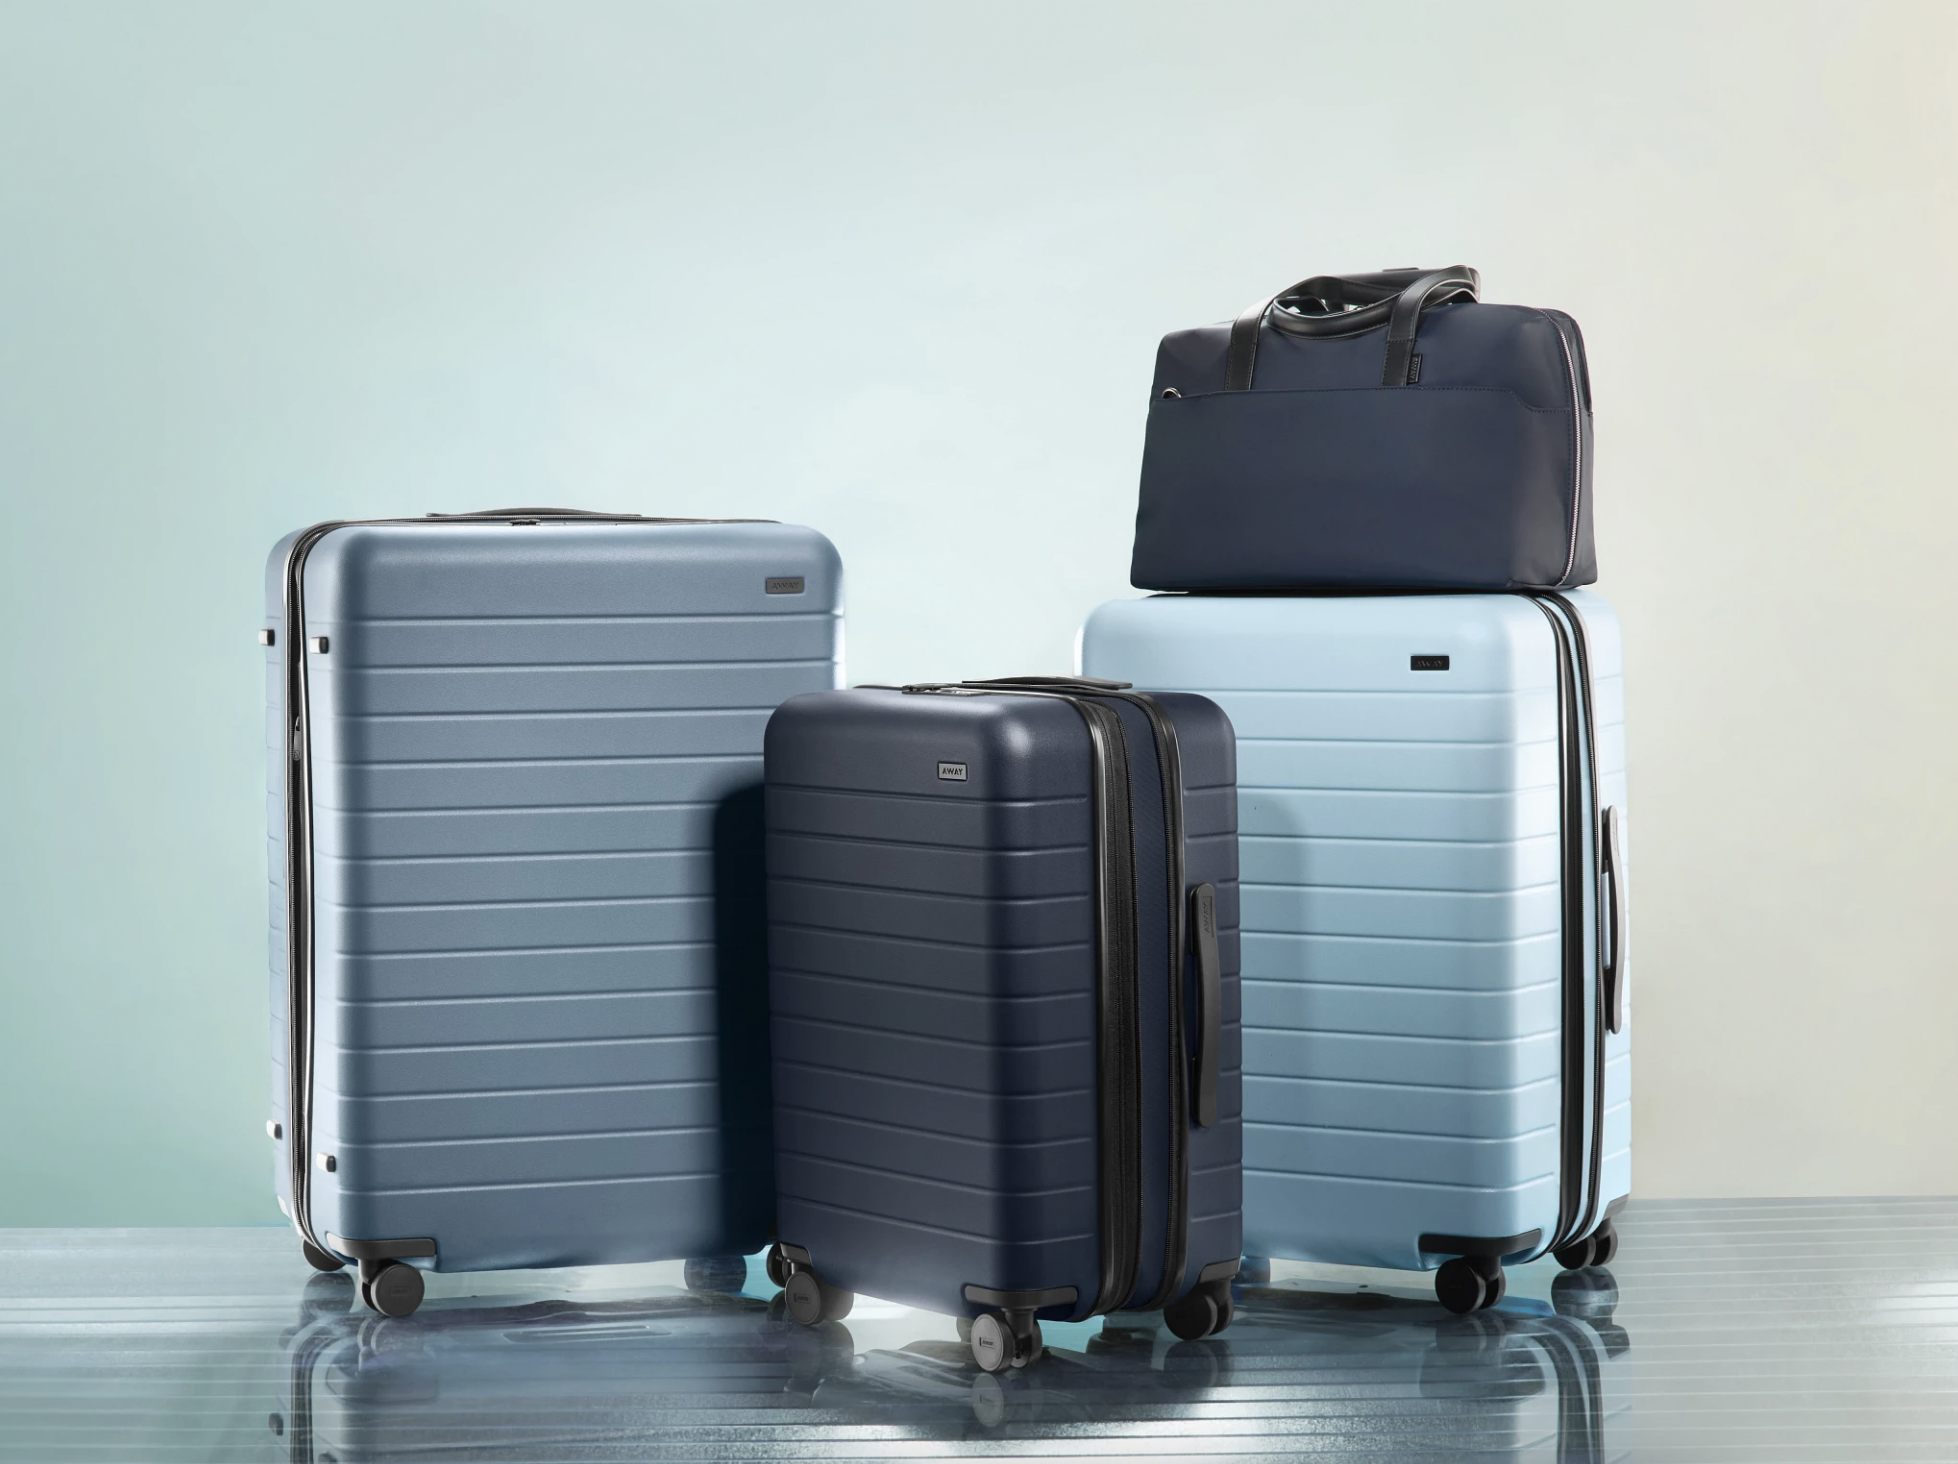 Best Away Luggage Dupes: This Target Option Is $200 Less Than The OG